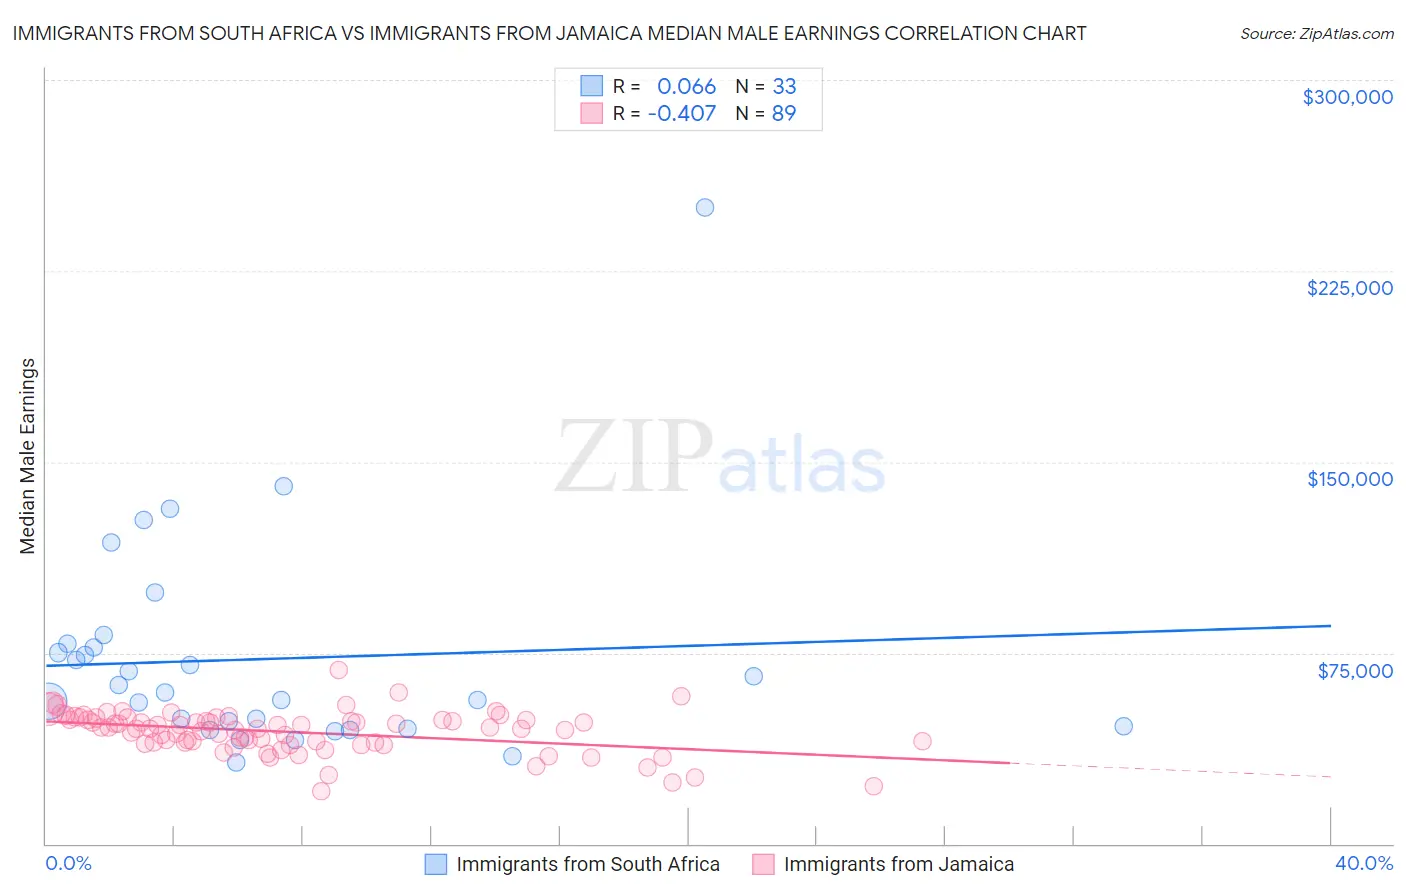 Immigrants from South Africa vs Immigrants from Jamaica Median Male Earnings